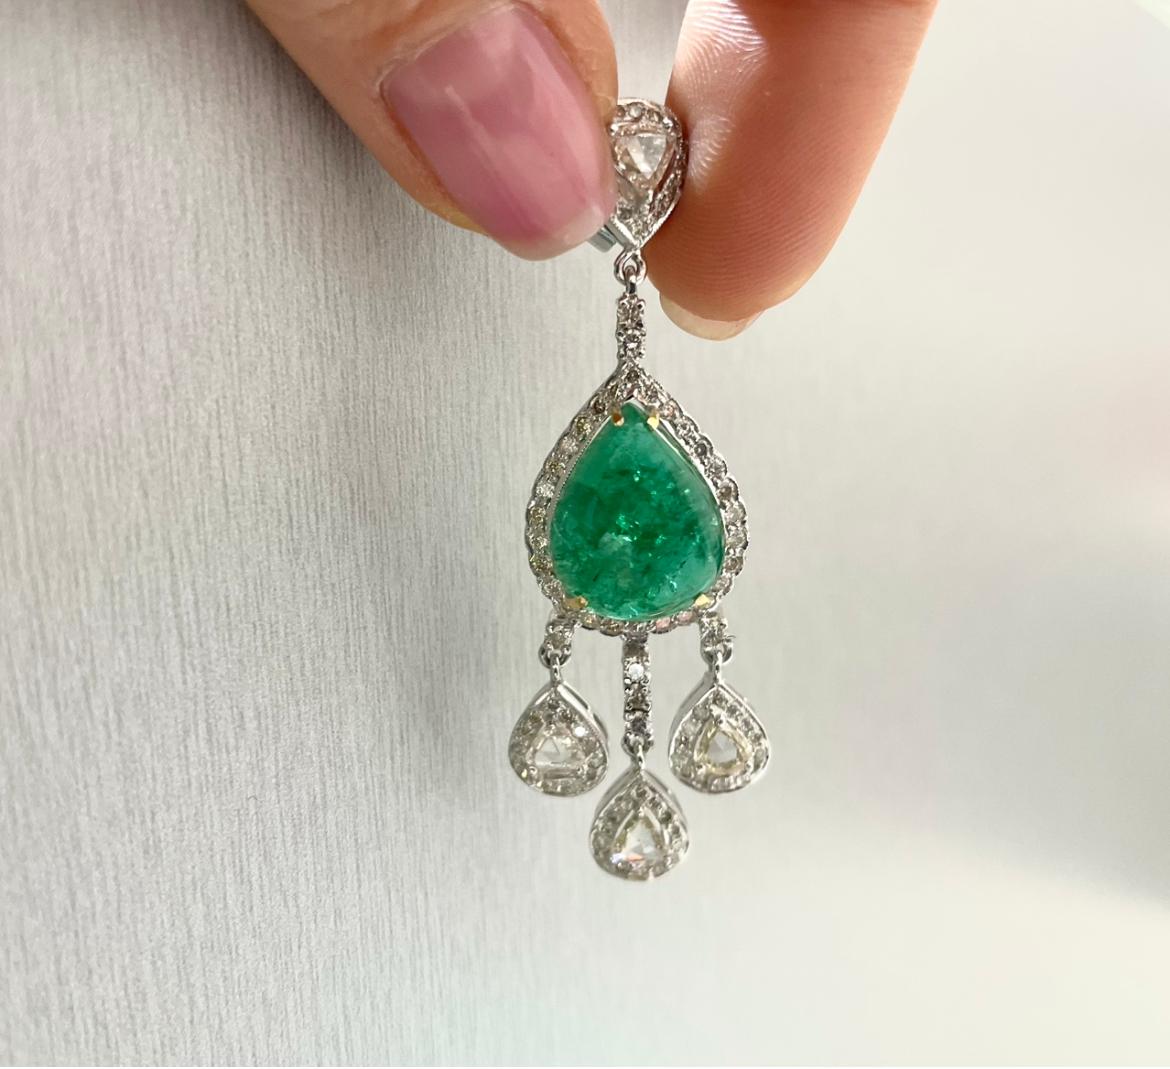 These earrings feature an exquisite design with an emphasis on emerald cabochons and diamonds, all set in 18K gold. The emerald cabochons in these earrings have a total weight of 16 carats, showcasing their captivating green color. Cabochon-cut